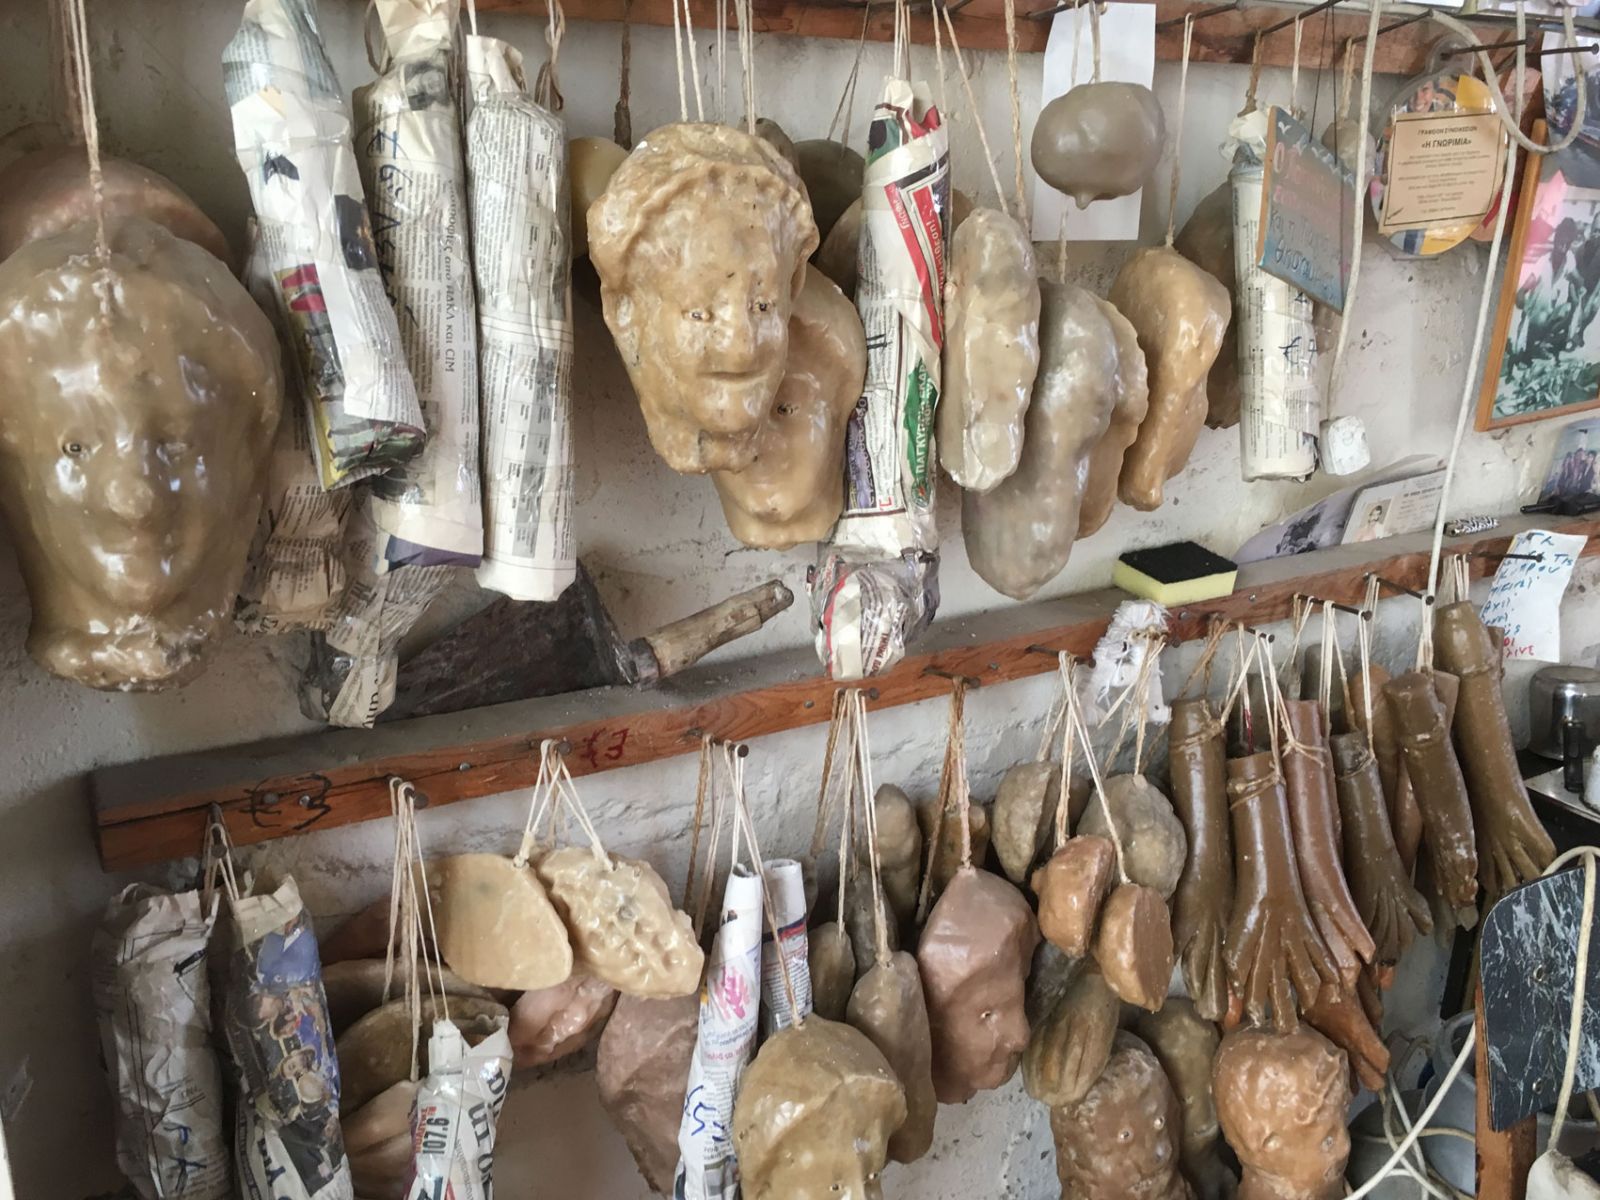 Handmade wax babies, candles and other votive offerings for sale in Larnaca, Cyprus (image by Maureen Carroll and used by permission)